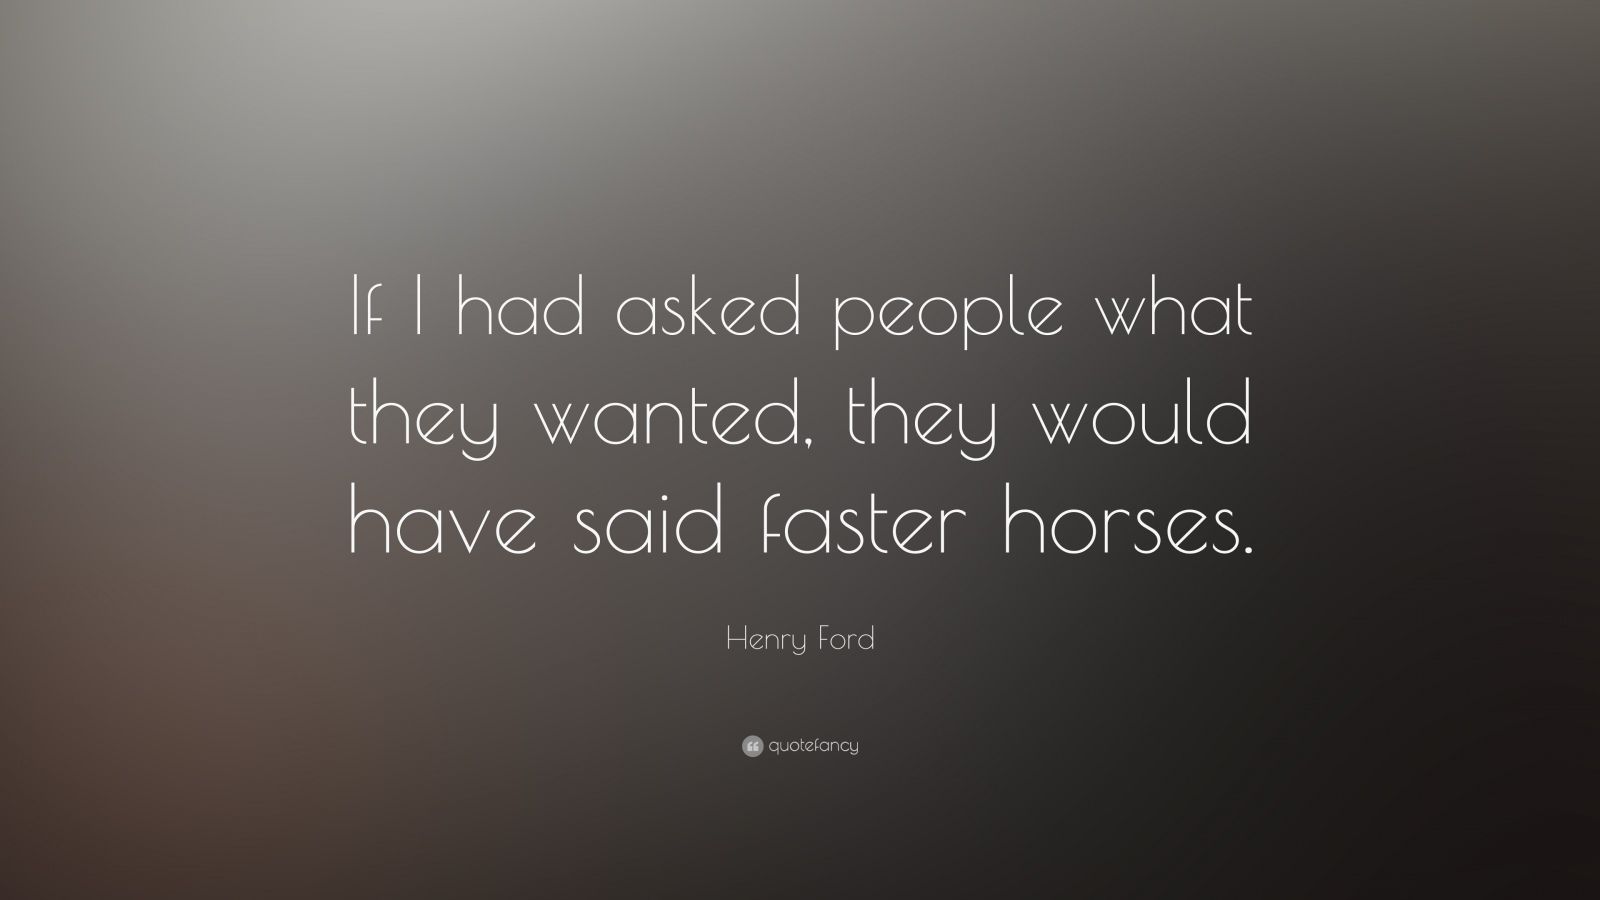 Henry ford they would have said a faster horse #2